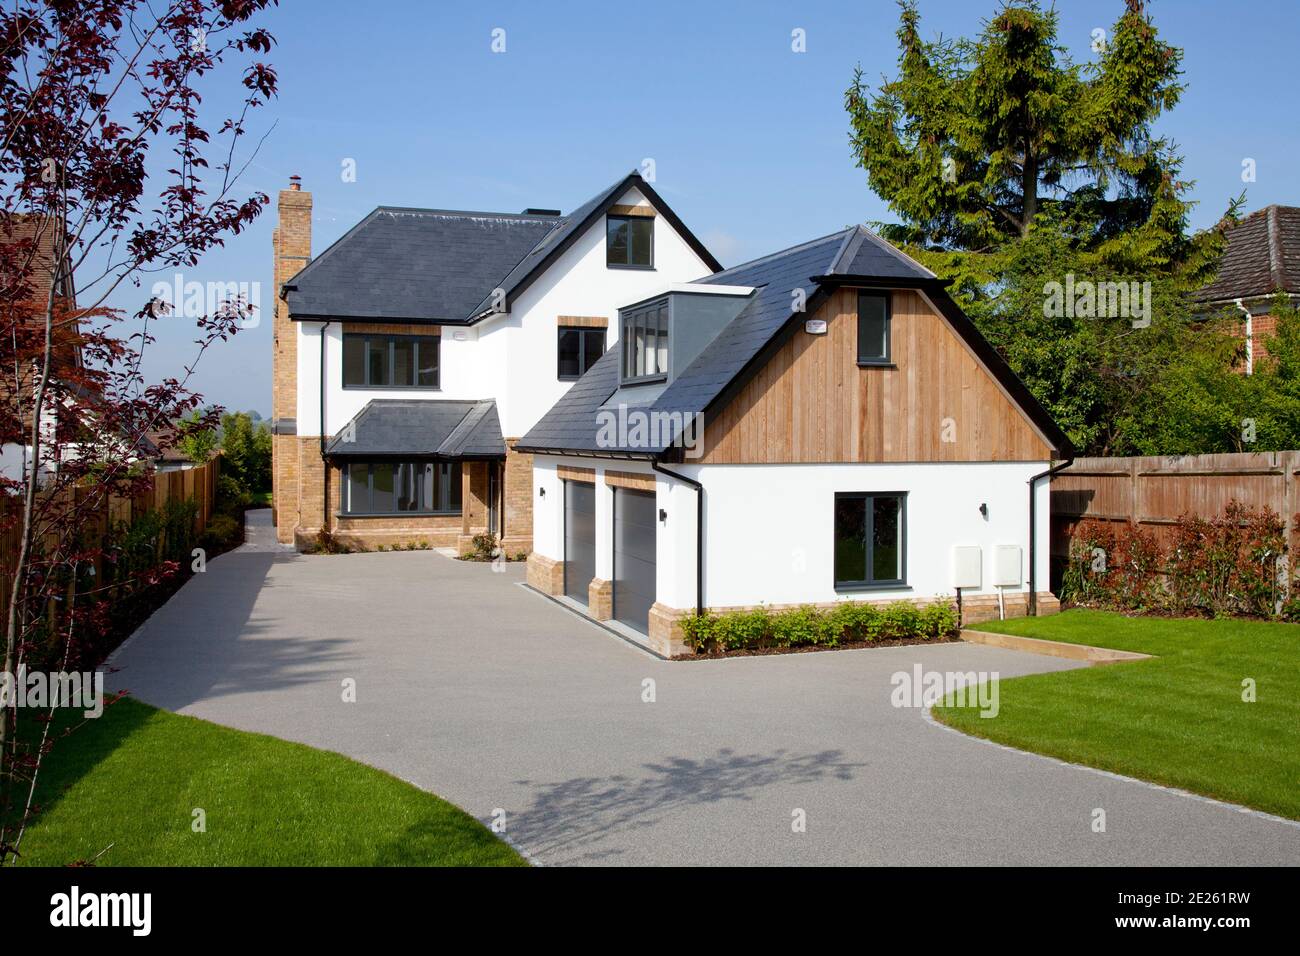 Contemporary new build house and garage with wood cladding, brick and white plastered walls, a grey slate roof, and grey resin-bonded drive Stock Photo